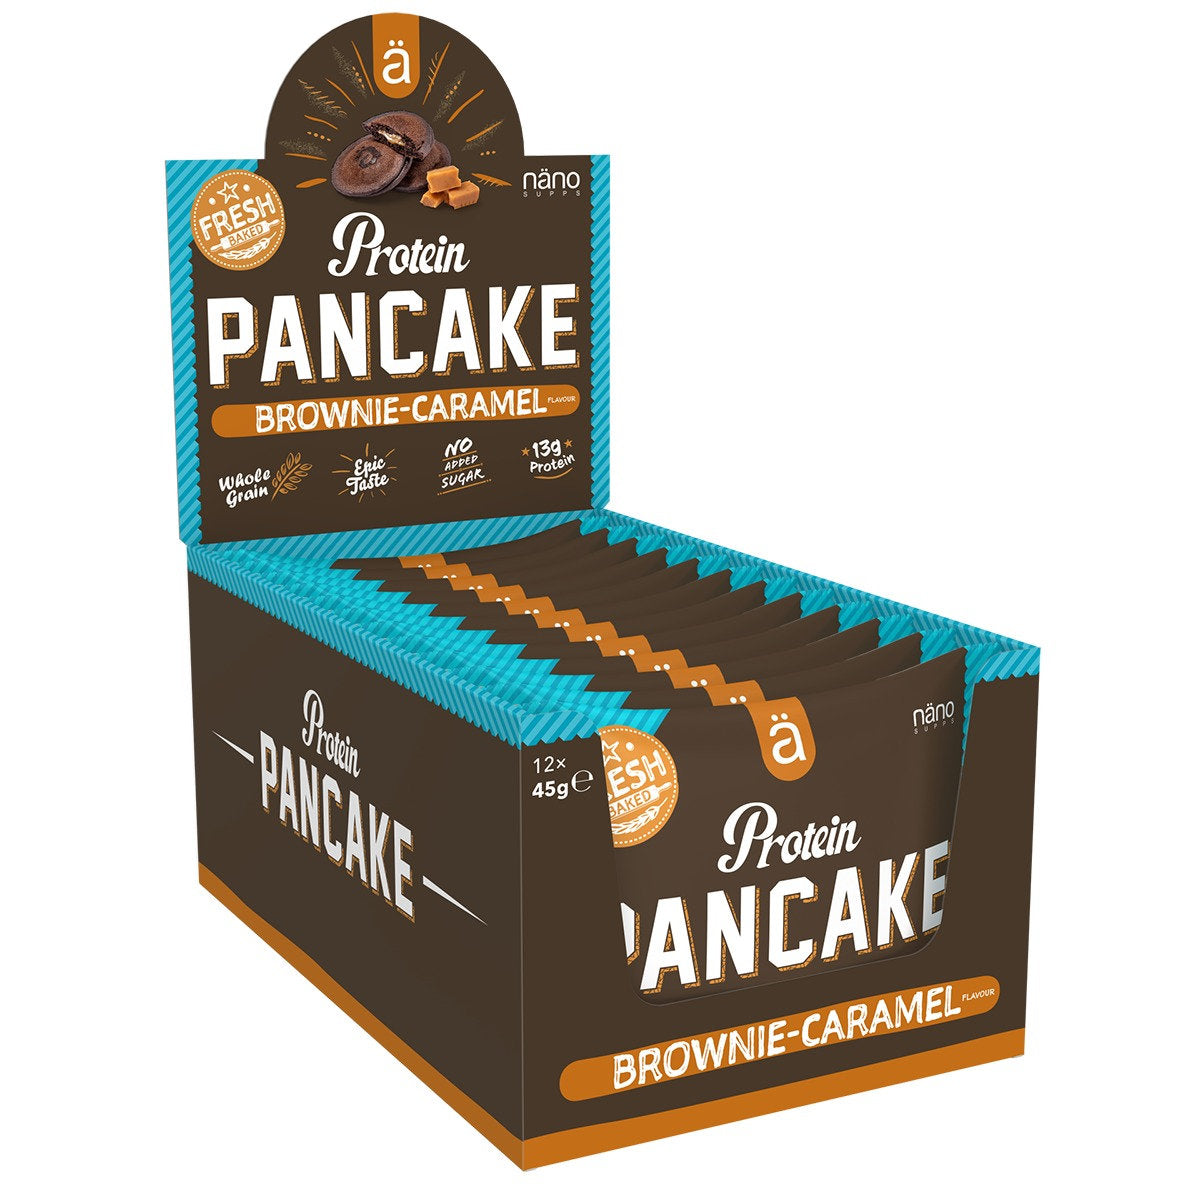 Nano Supplements Protein Pancake (Box of 12) Protein Snacks Brownie - Caramel BEST BY April 19, 2023 Nano Supplements nano-supplements-protein-pancake-box-of-12